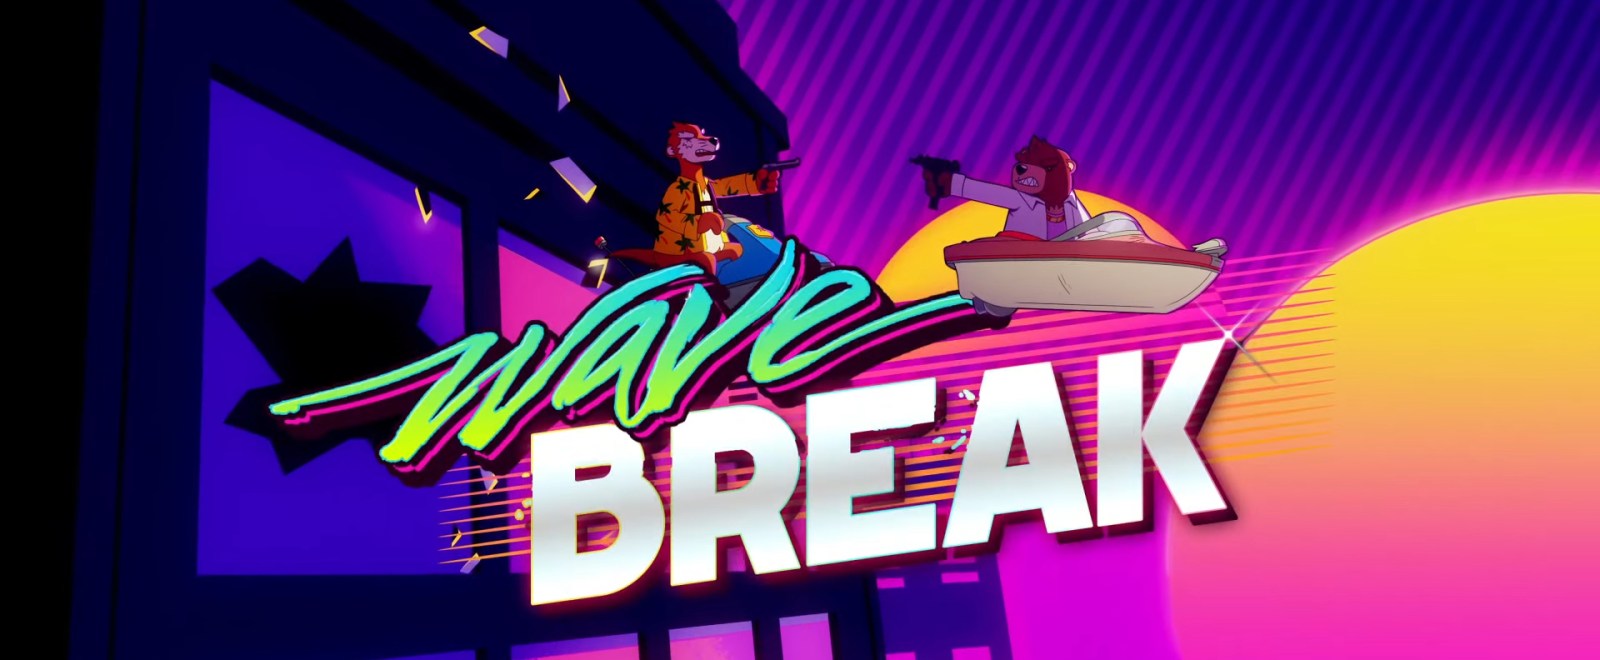 Wave Break Is The World S First Skateboating Game And It Looks Rad As Hell - brawl stars youtube ouverture mega